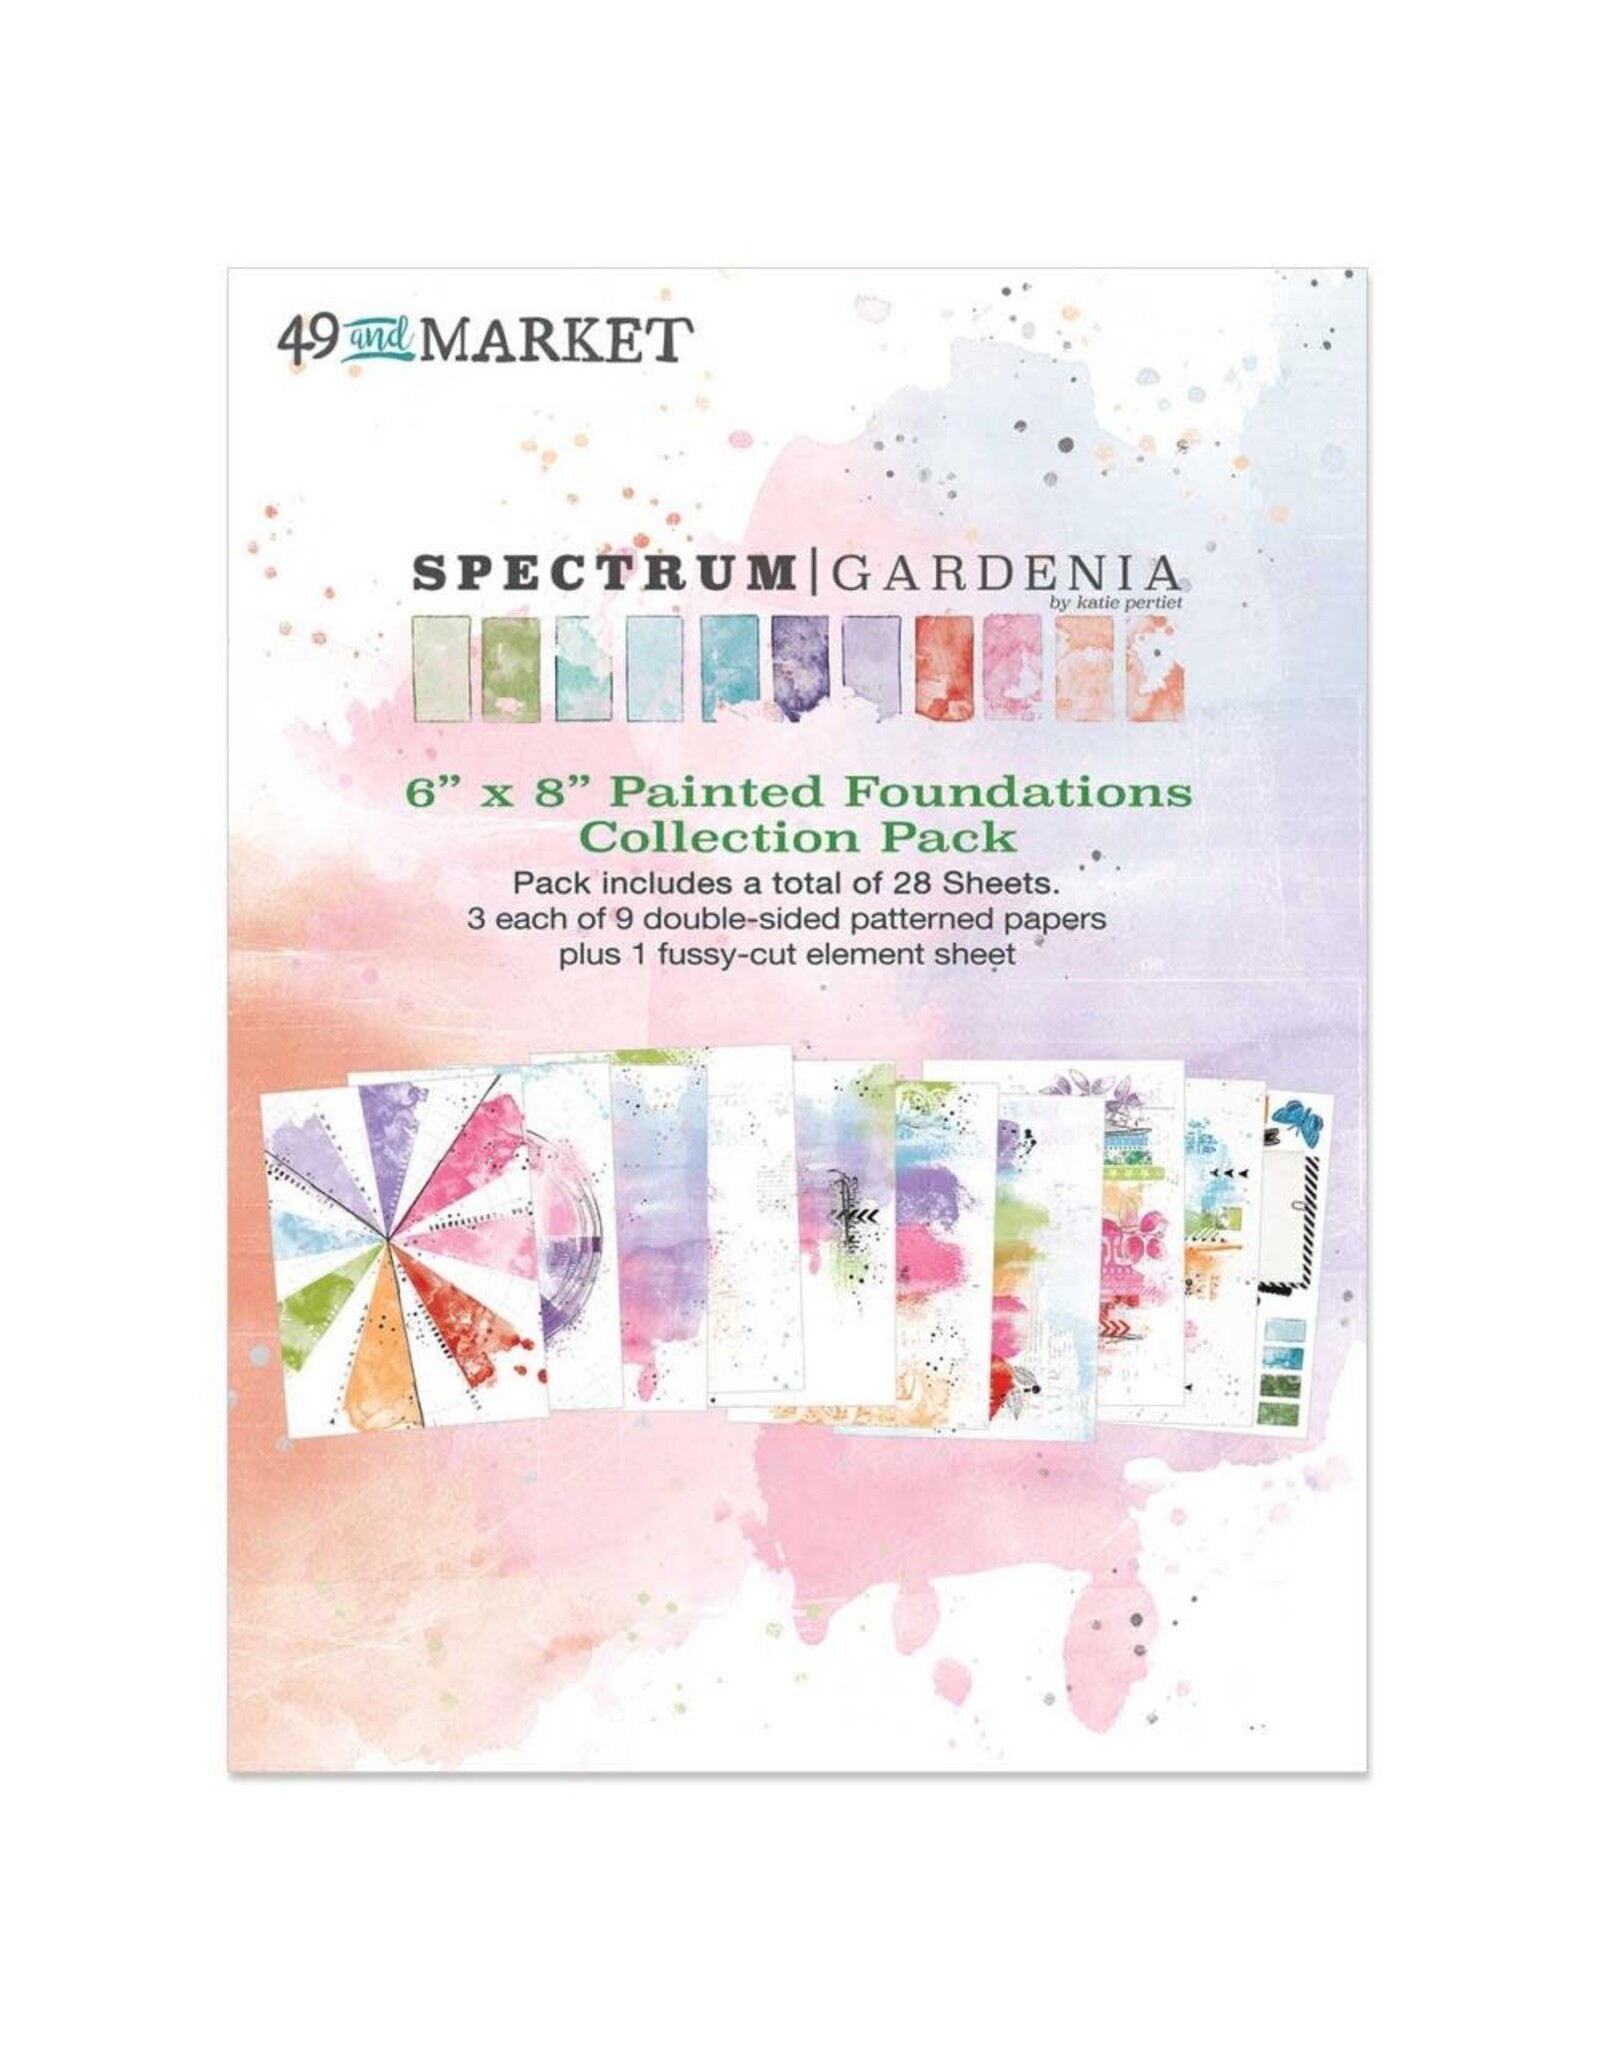 49 AND MARKET 49 AND MARKET SPECTRUM GARDENIA PAINTED FOUNDATIONS 6x8 COLLECTION PACK